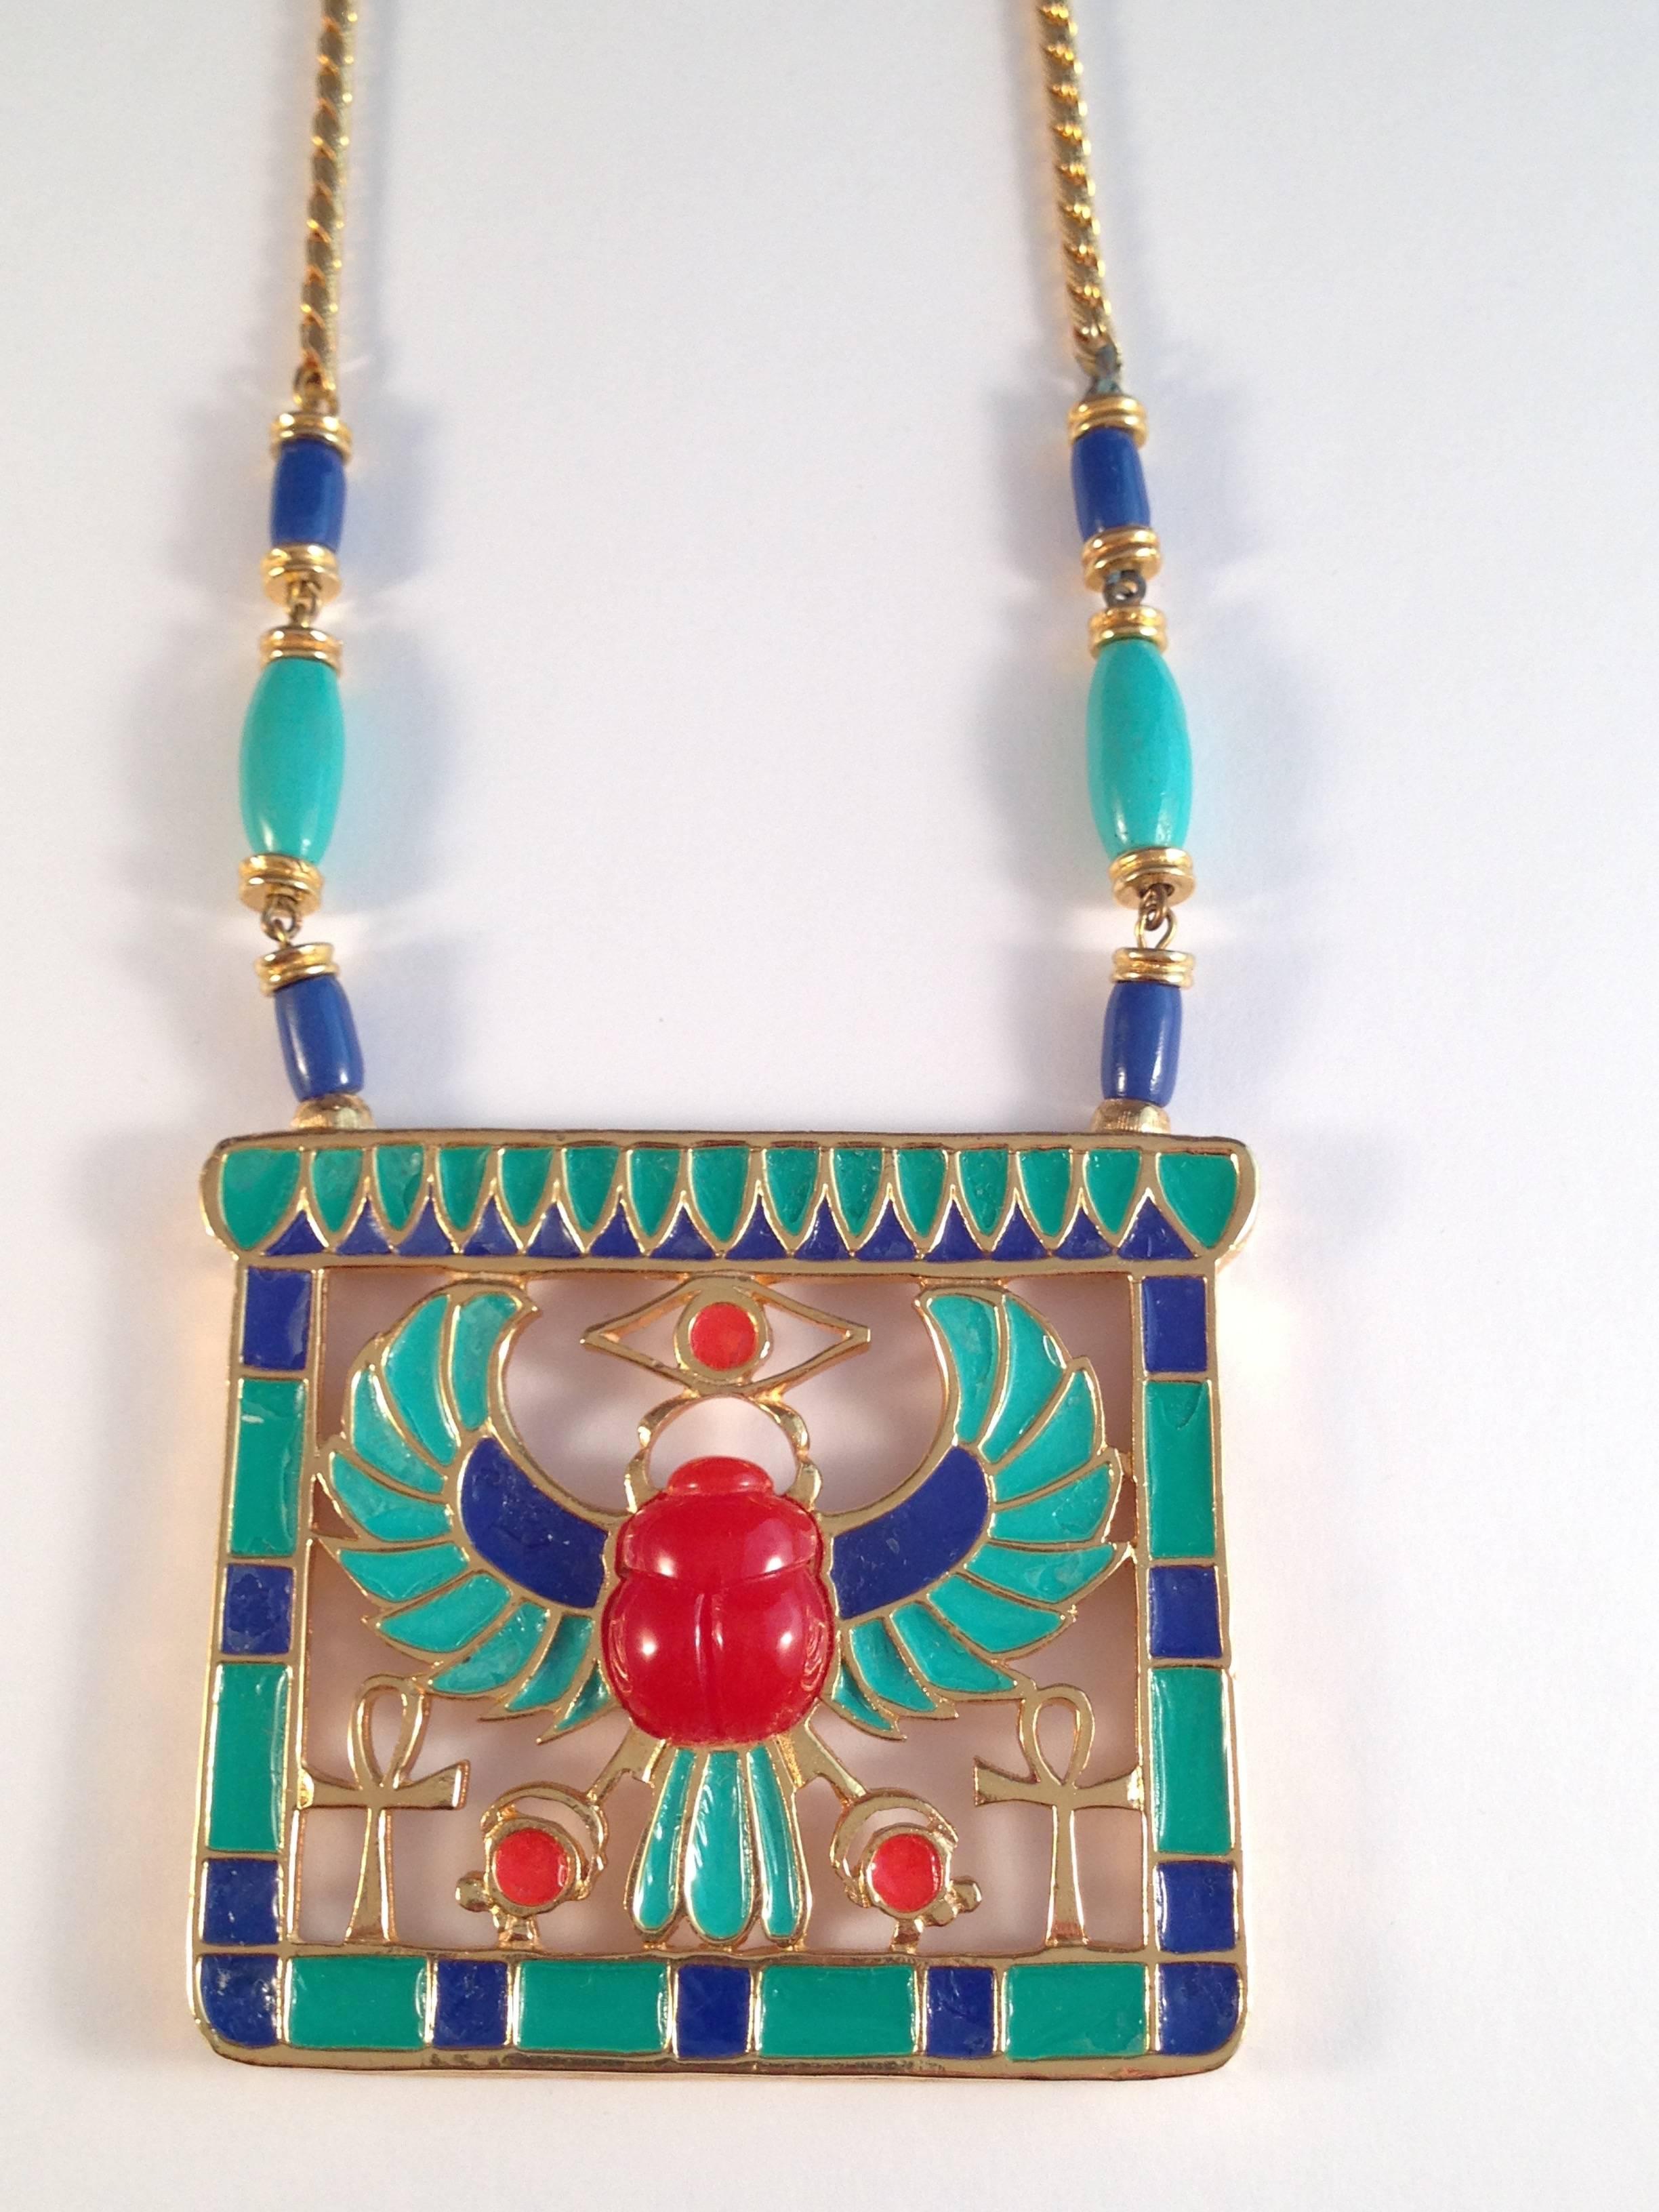 This hard to find Egyptian revival pendant necklace was made in the 1960s by Hattie Carnegie. It features an enameled gold tone pendant in brilliant blue and turquoise with a resin amber-colored winged scarab in the center. The chain measures